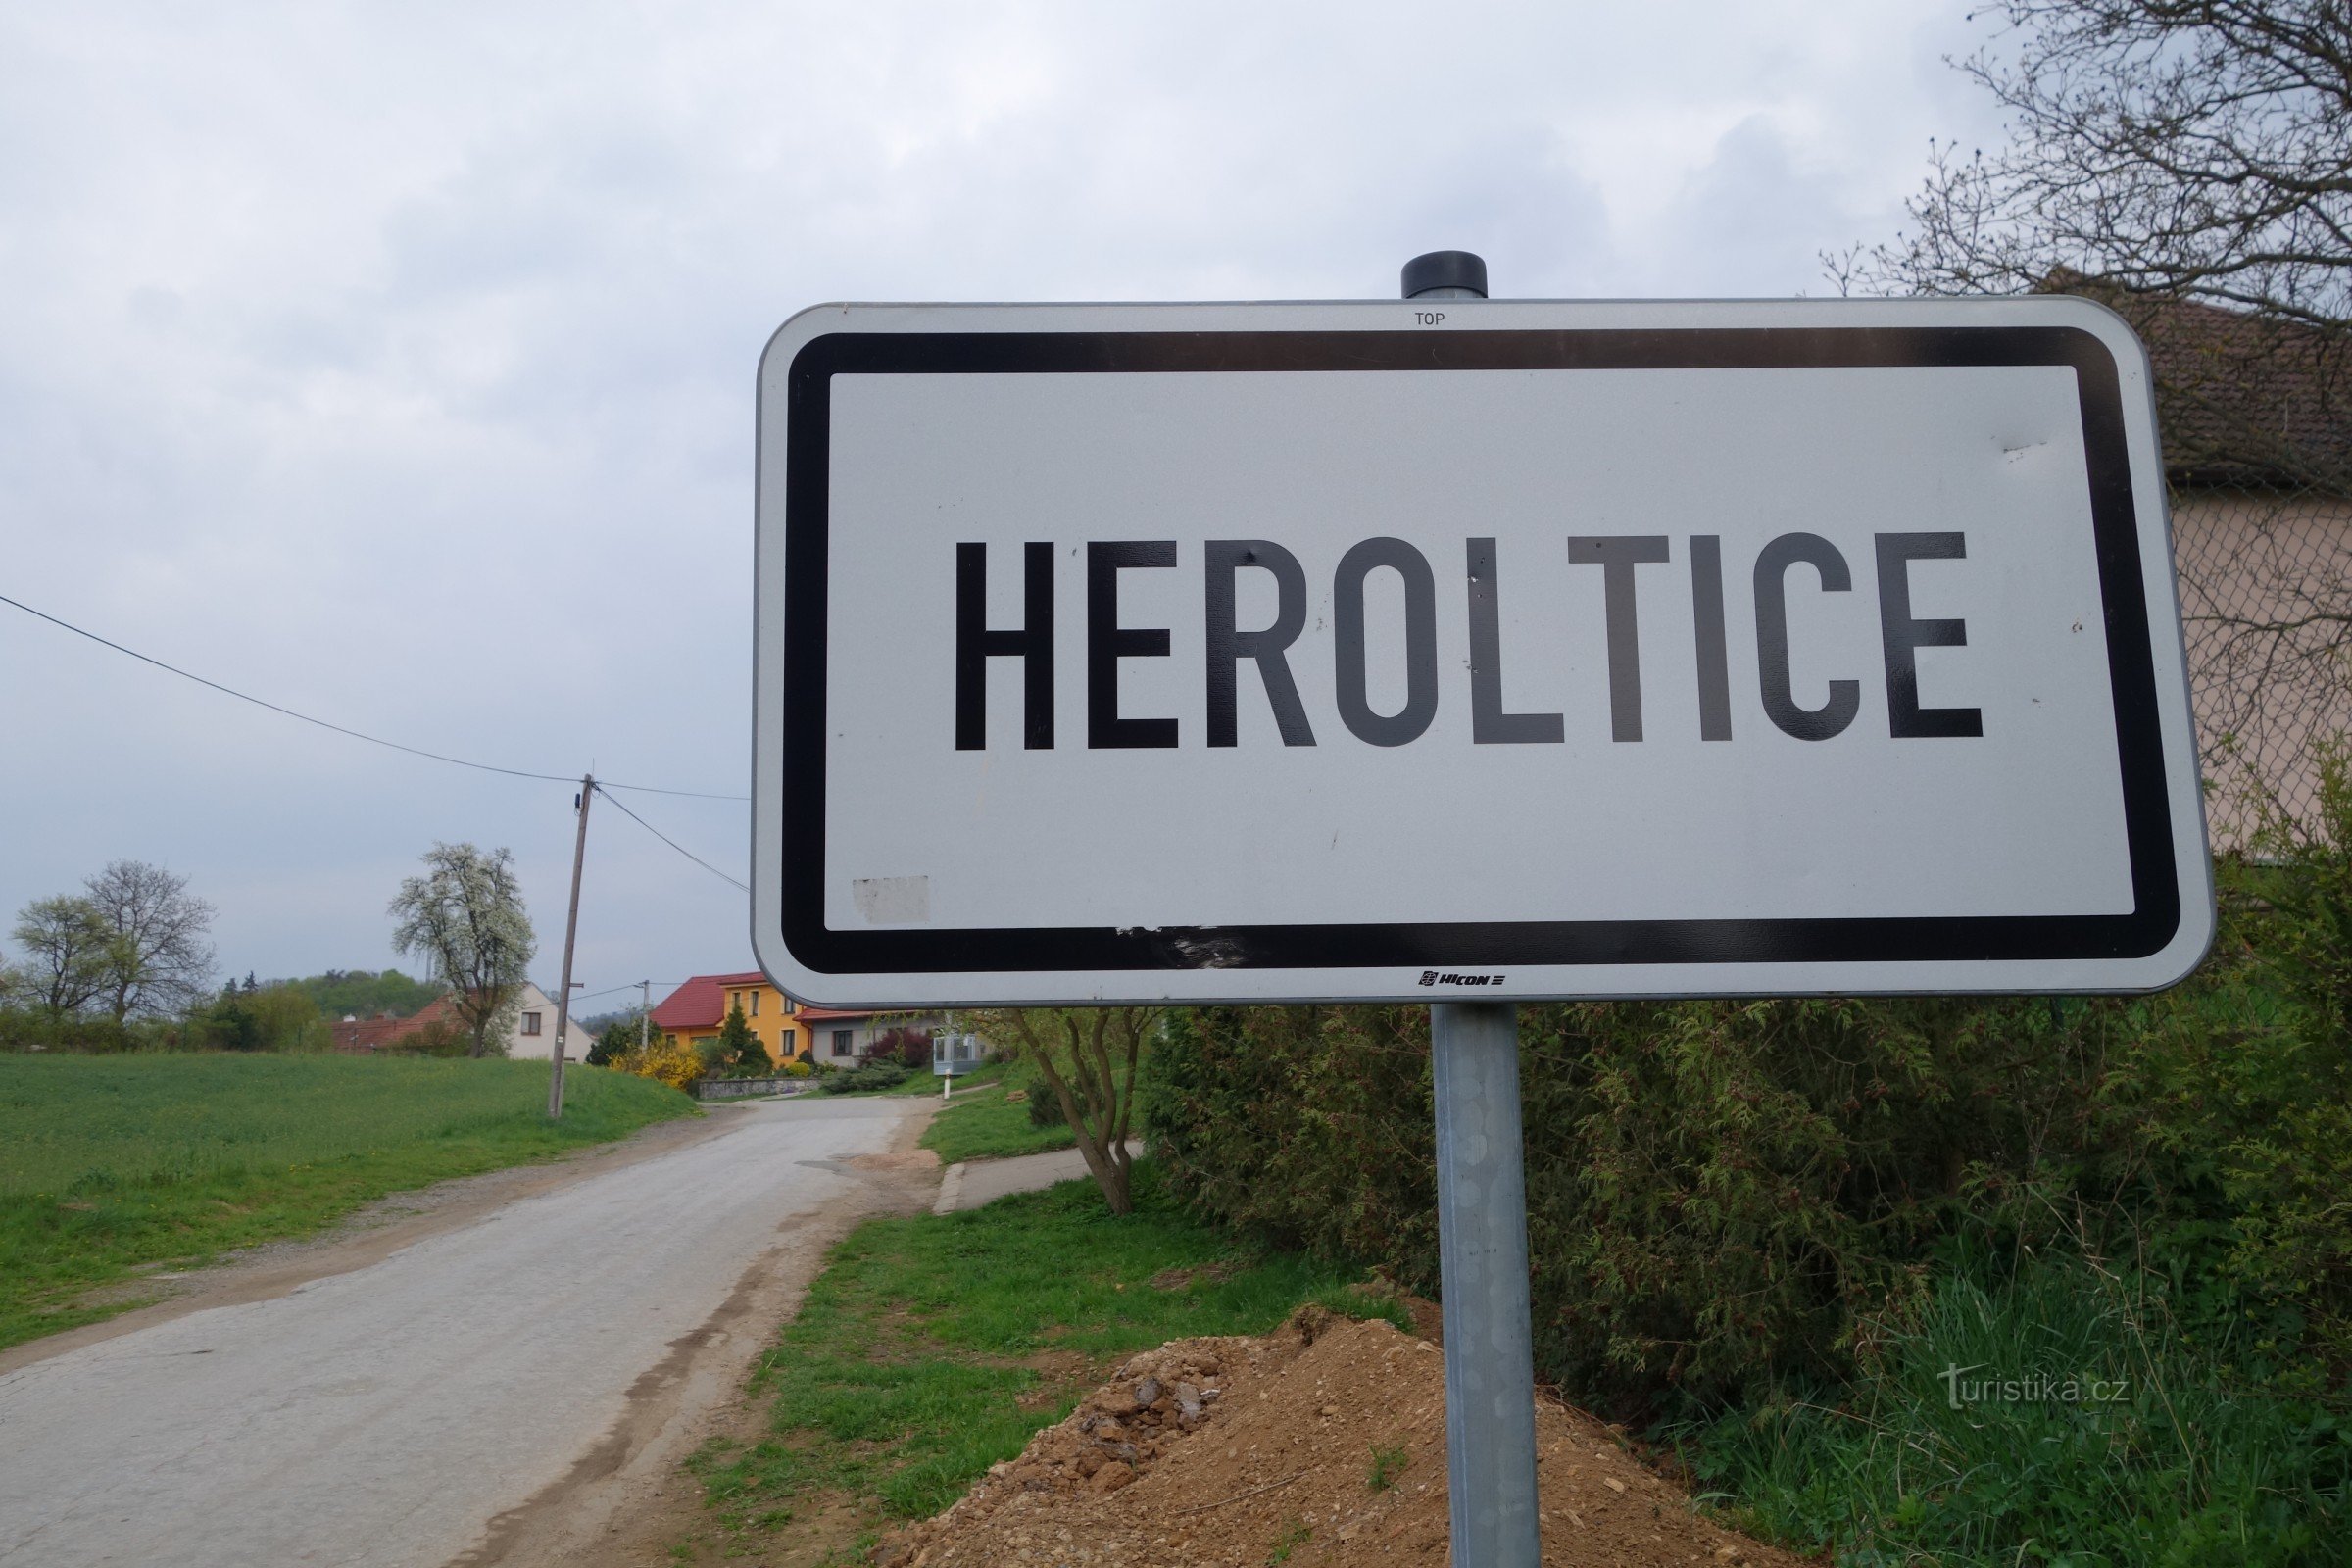 Heroltice